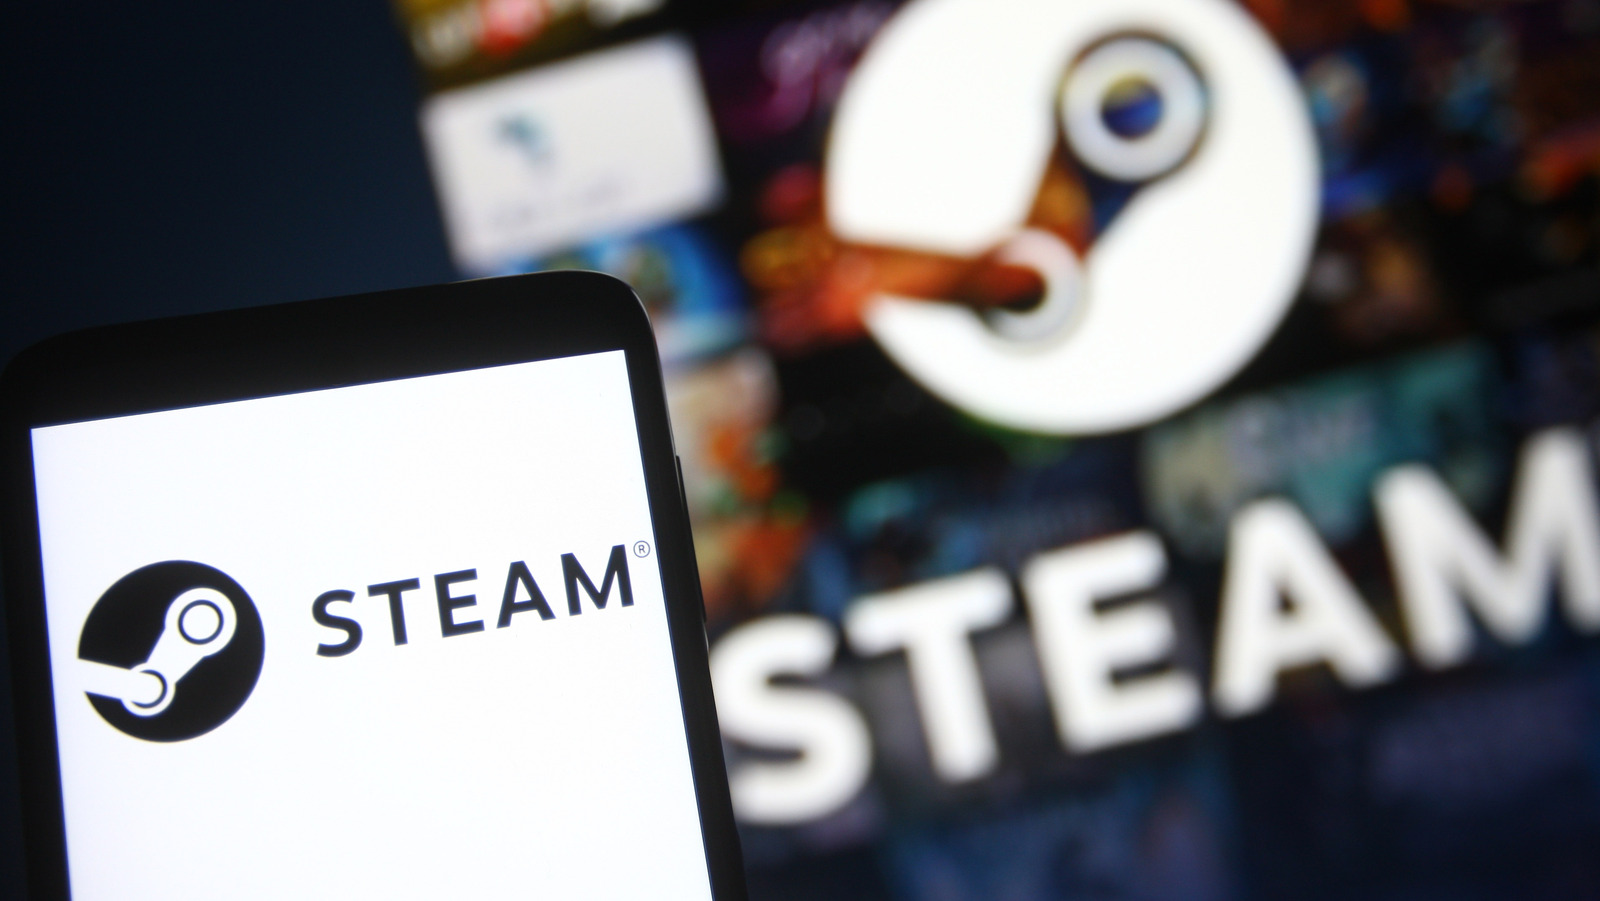 Steam is having issues фото 25